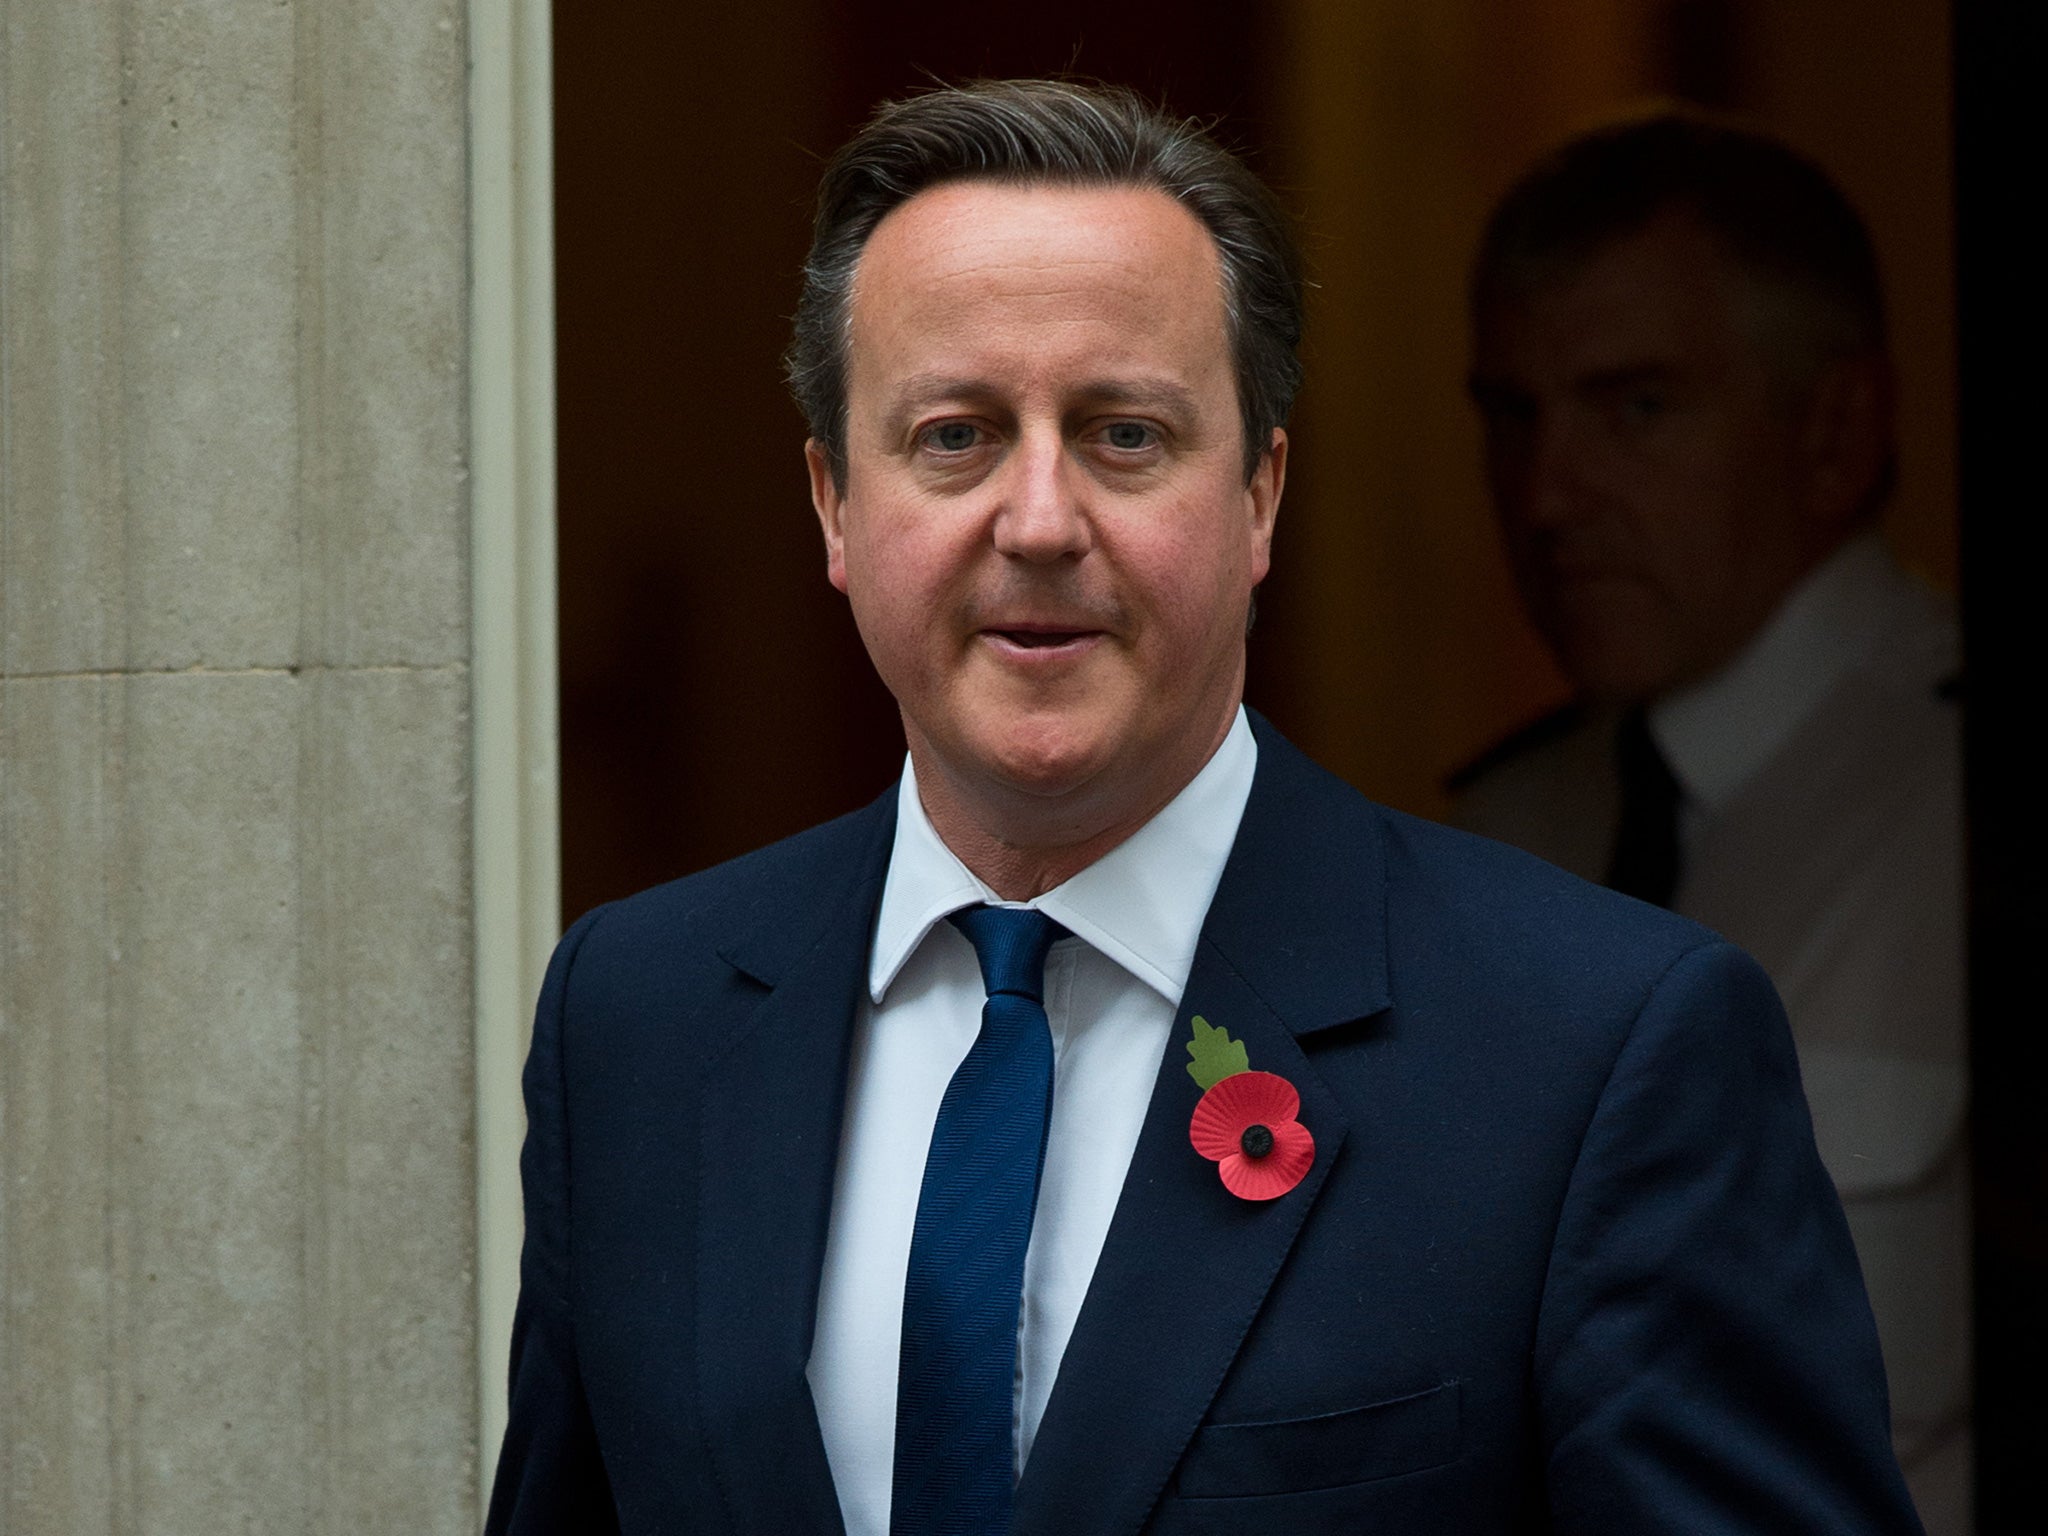 David Cameron was forced to personally intervene in international matters